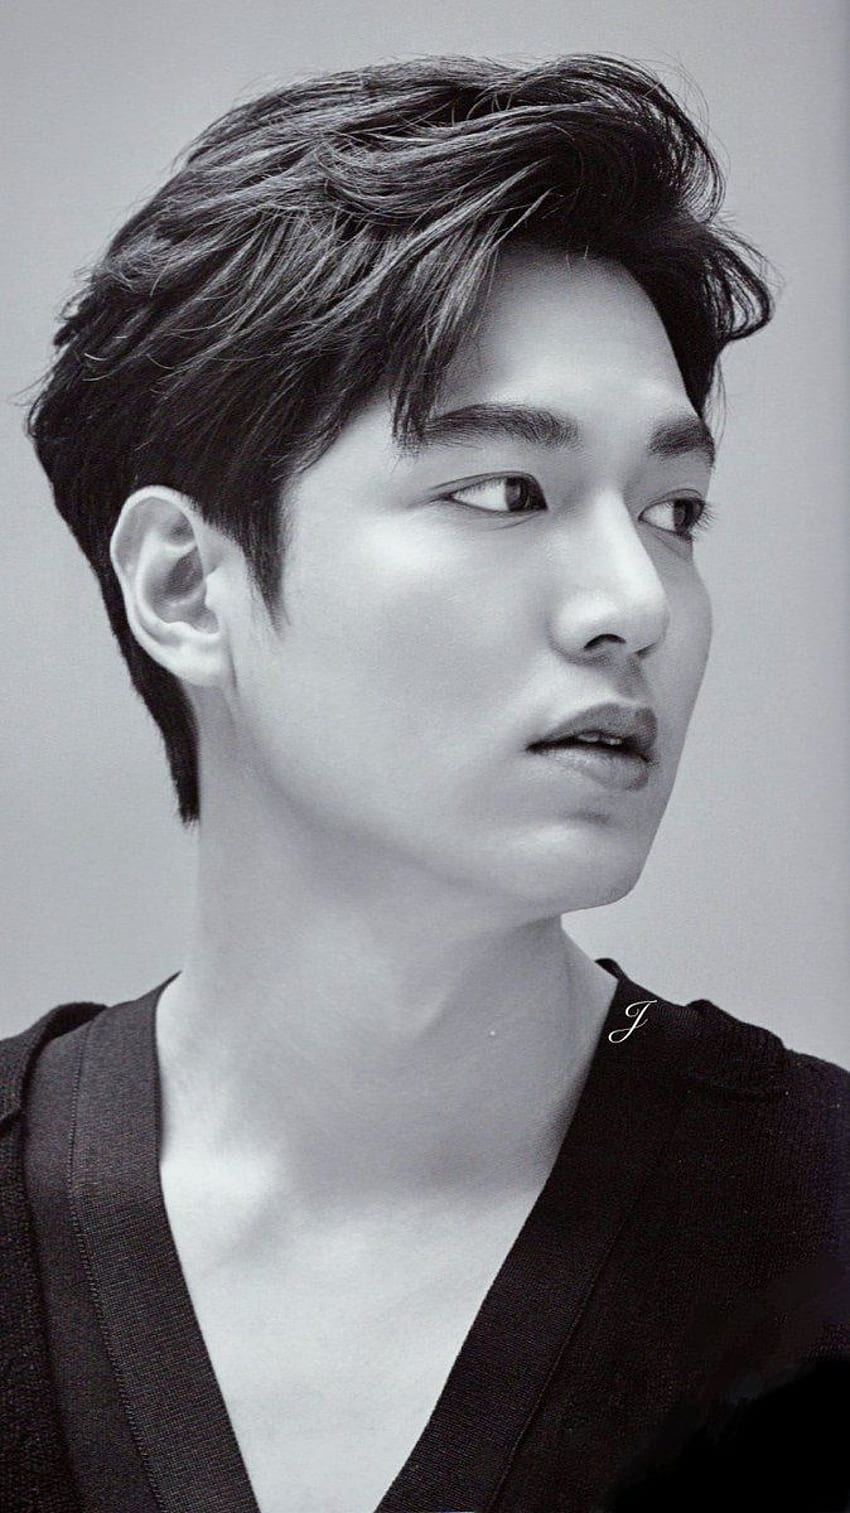 Lee Min Ho Hairstyle  Check this Asian Handsome Korean Actor Hairstyle   Mens Hairstyles  Haircuts X